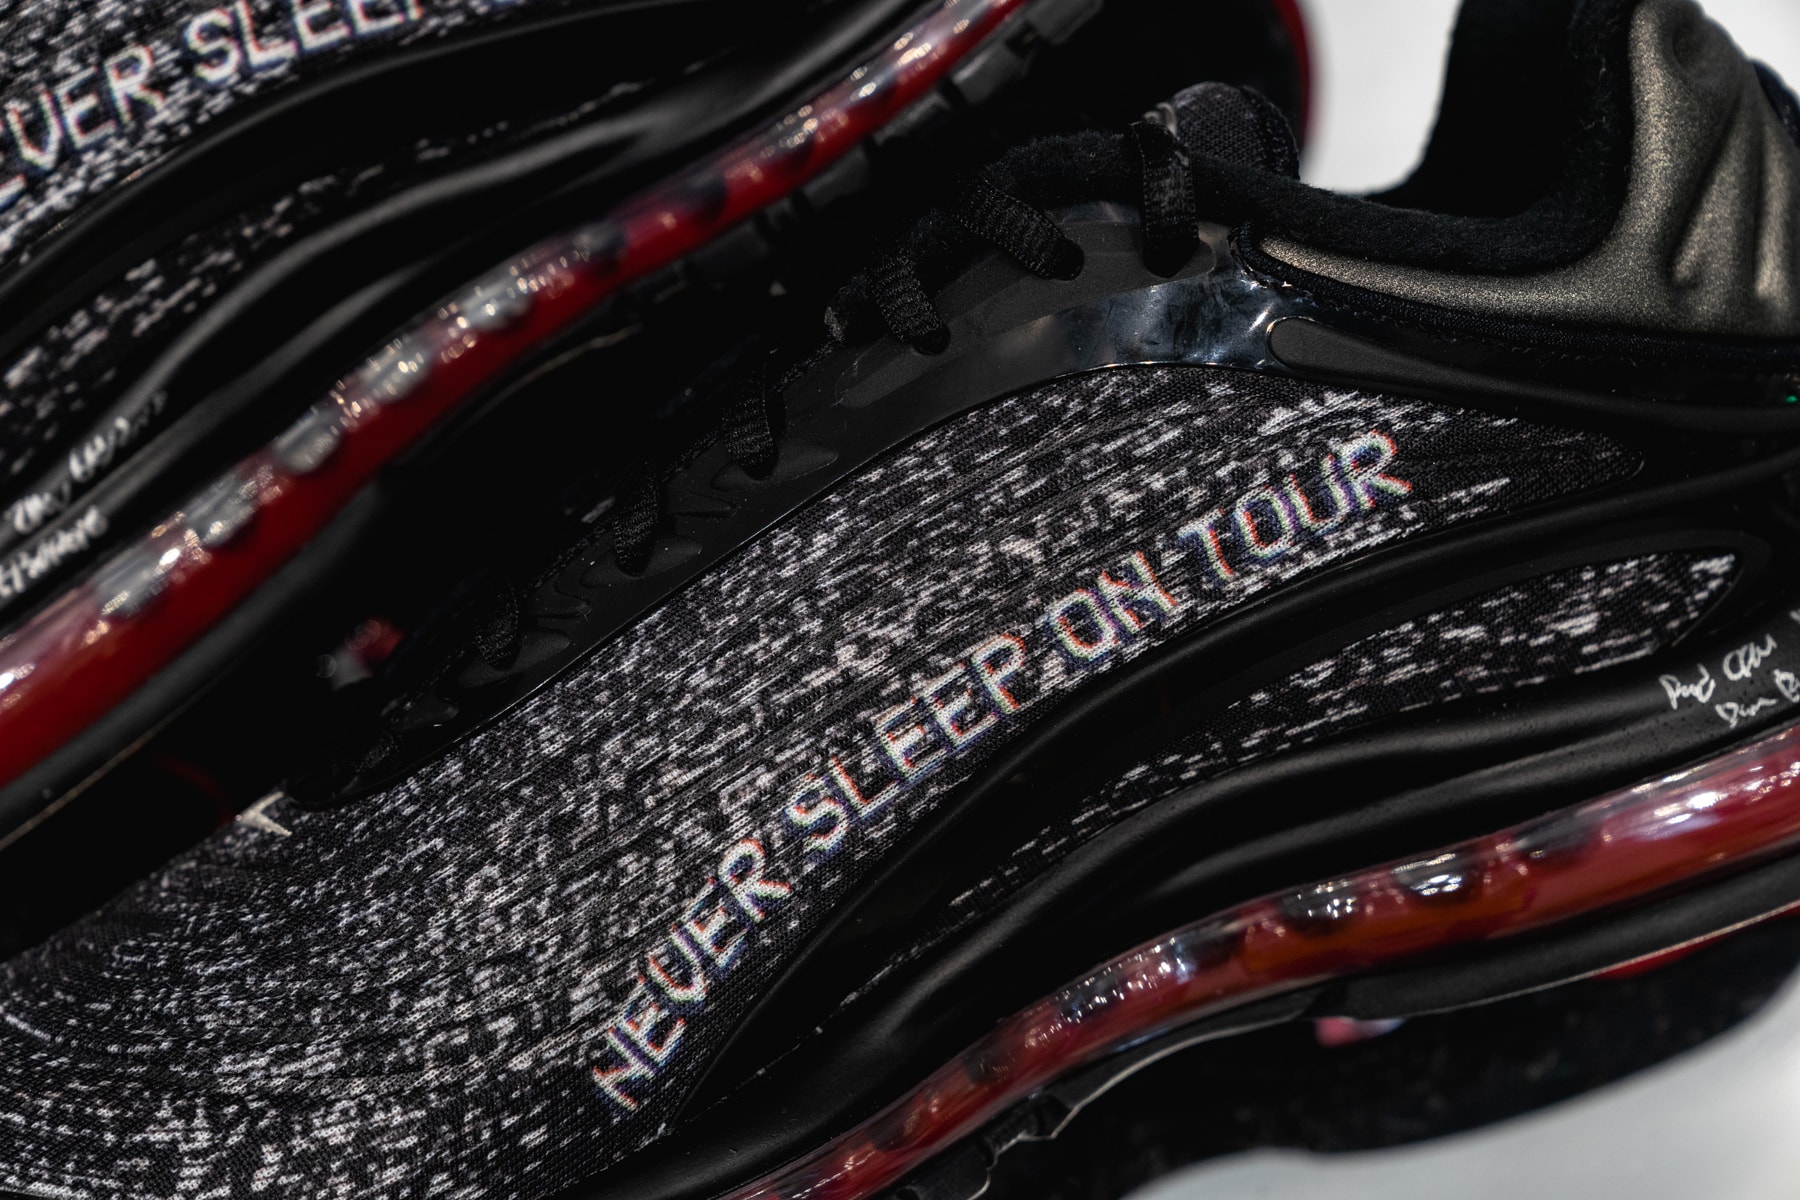 Skepta Nike Air Max Deluxe Closer Collab Look collaboration Black Red Static NEVER SLEEP ON TOUR